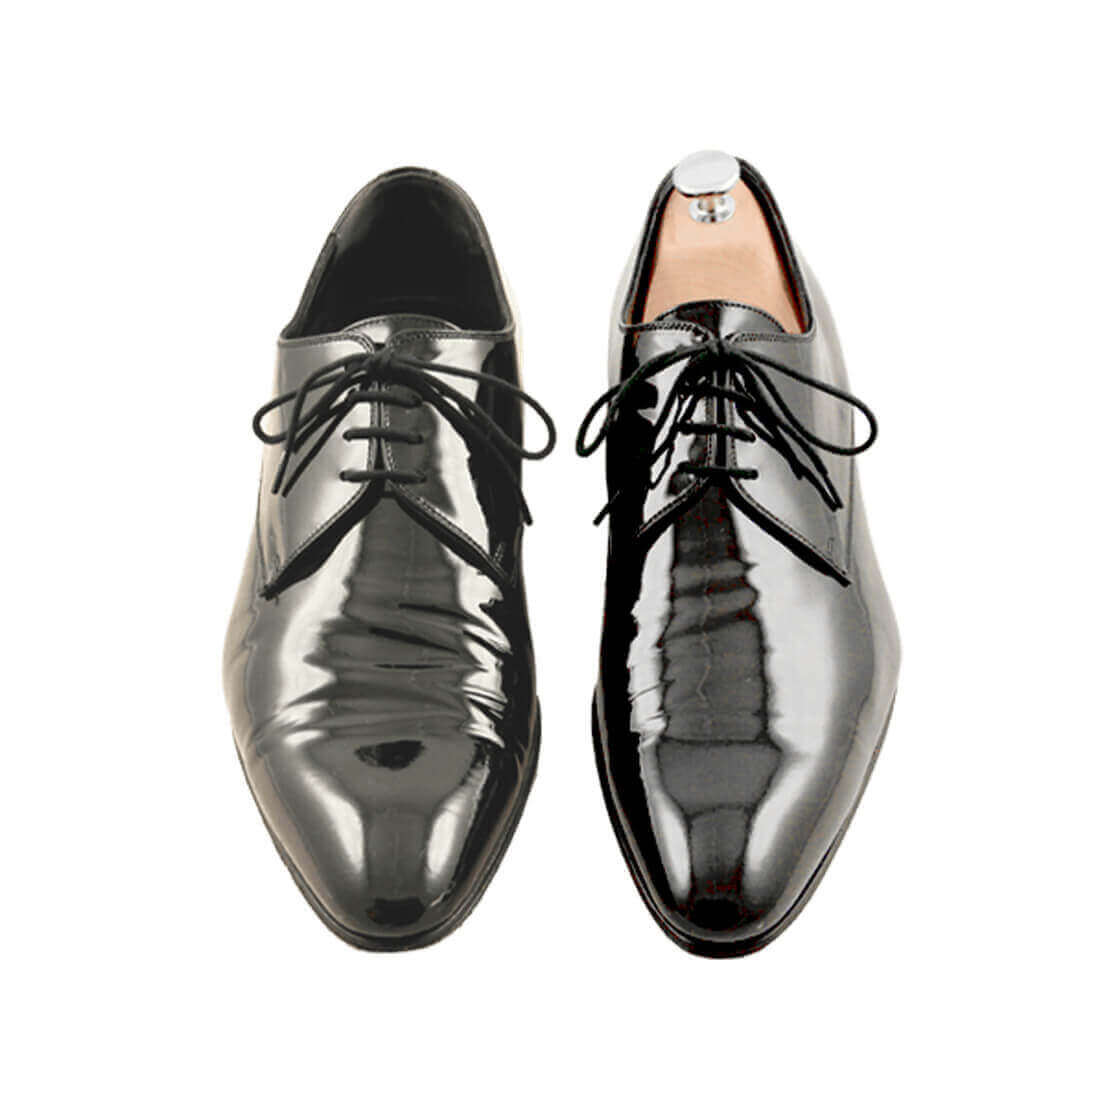 How To Polish Patent Leather Shoes and Preserve the Surface